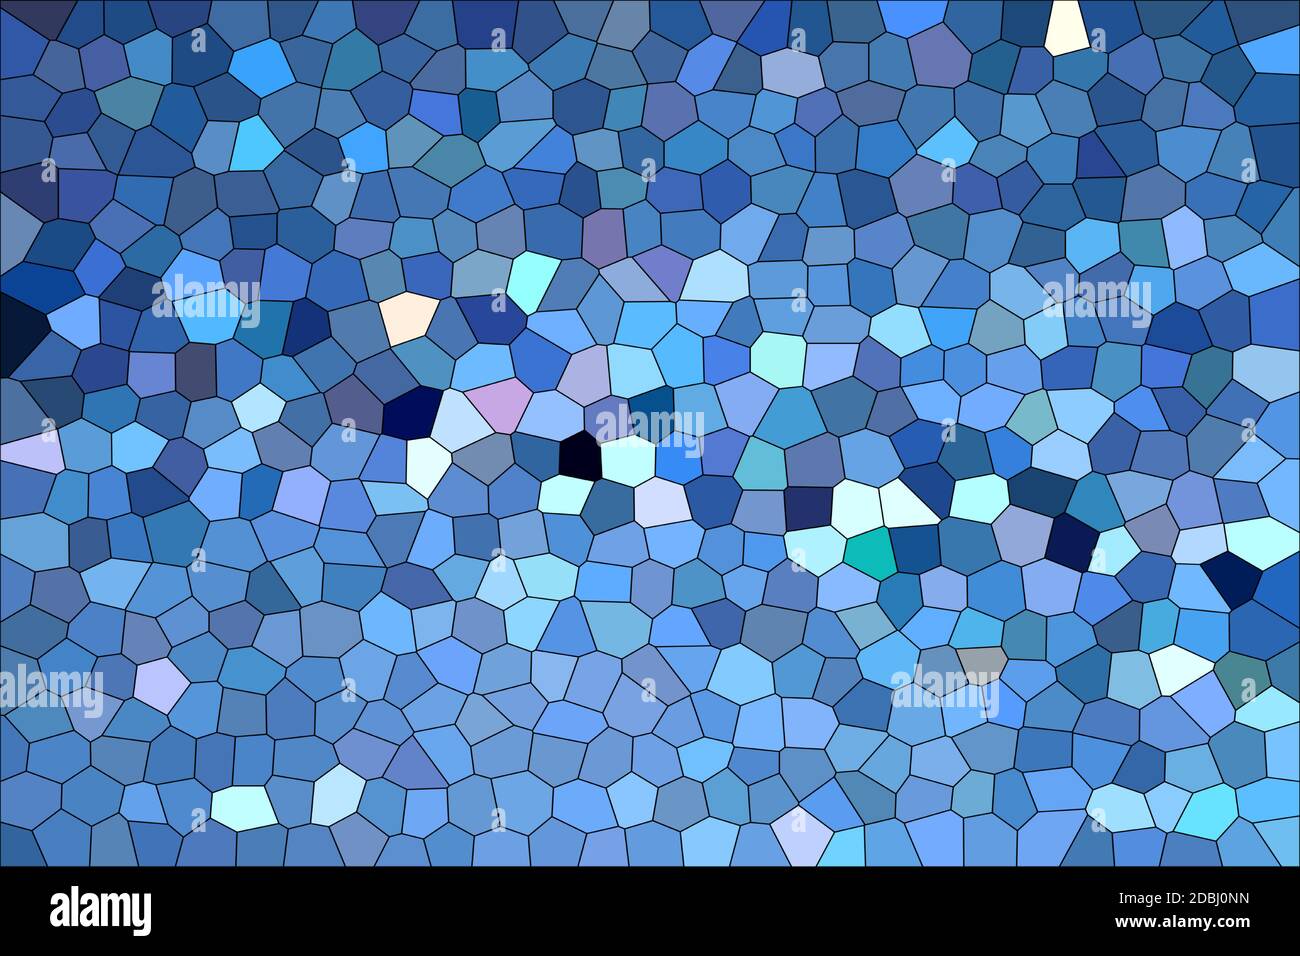 Abstract Blue Shades Modern Mosaic Tiles Material Texture Background